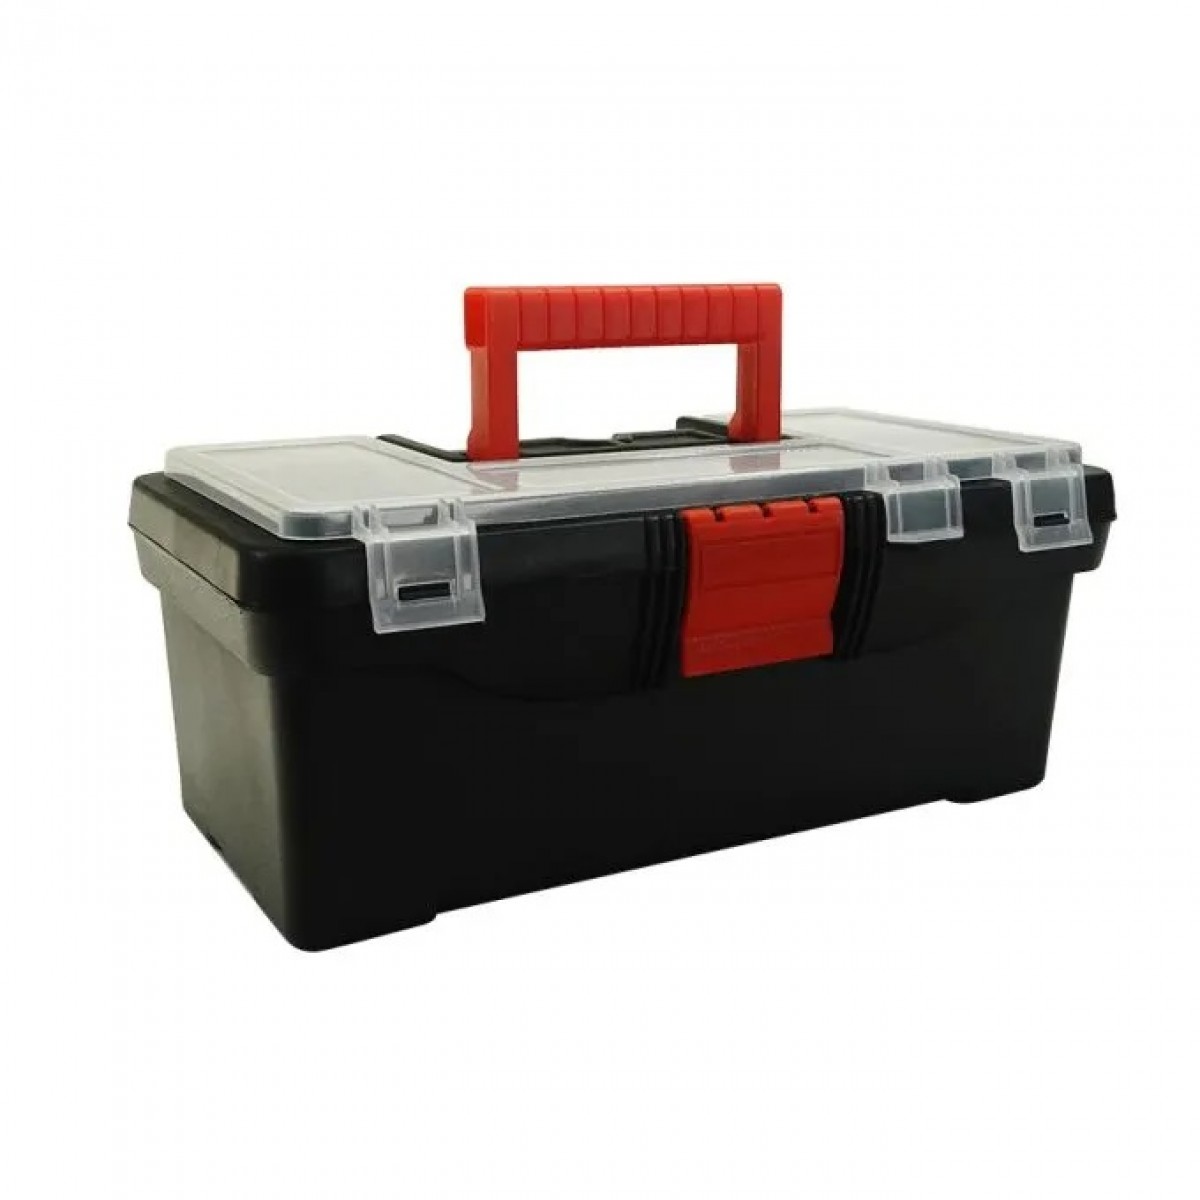 AddTools Small Tool Box with Removable Tray - 32 cm x 18 cm x 13